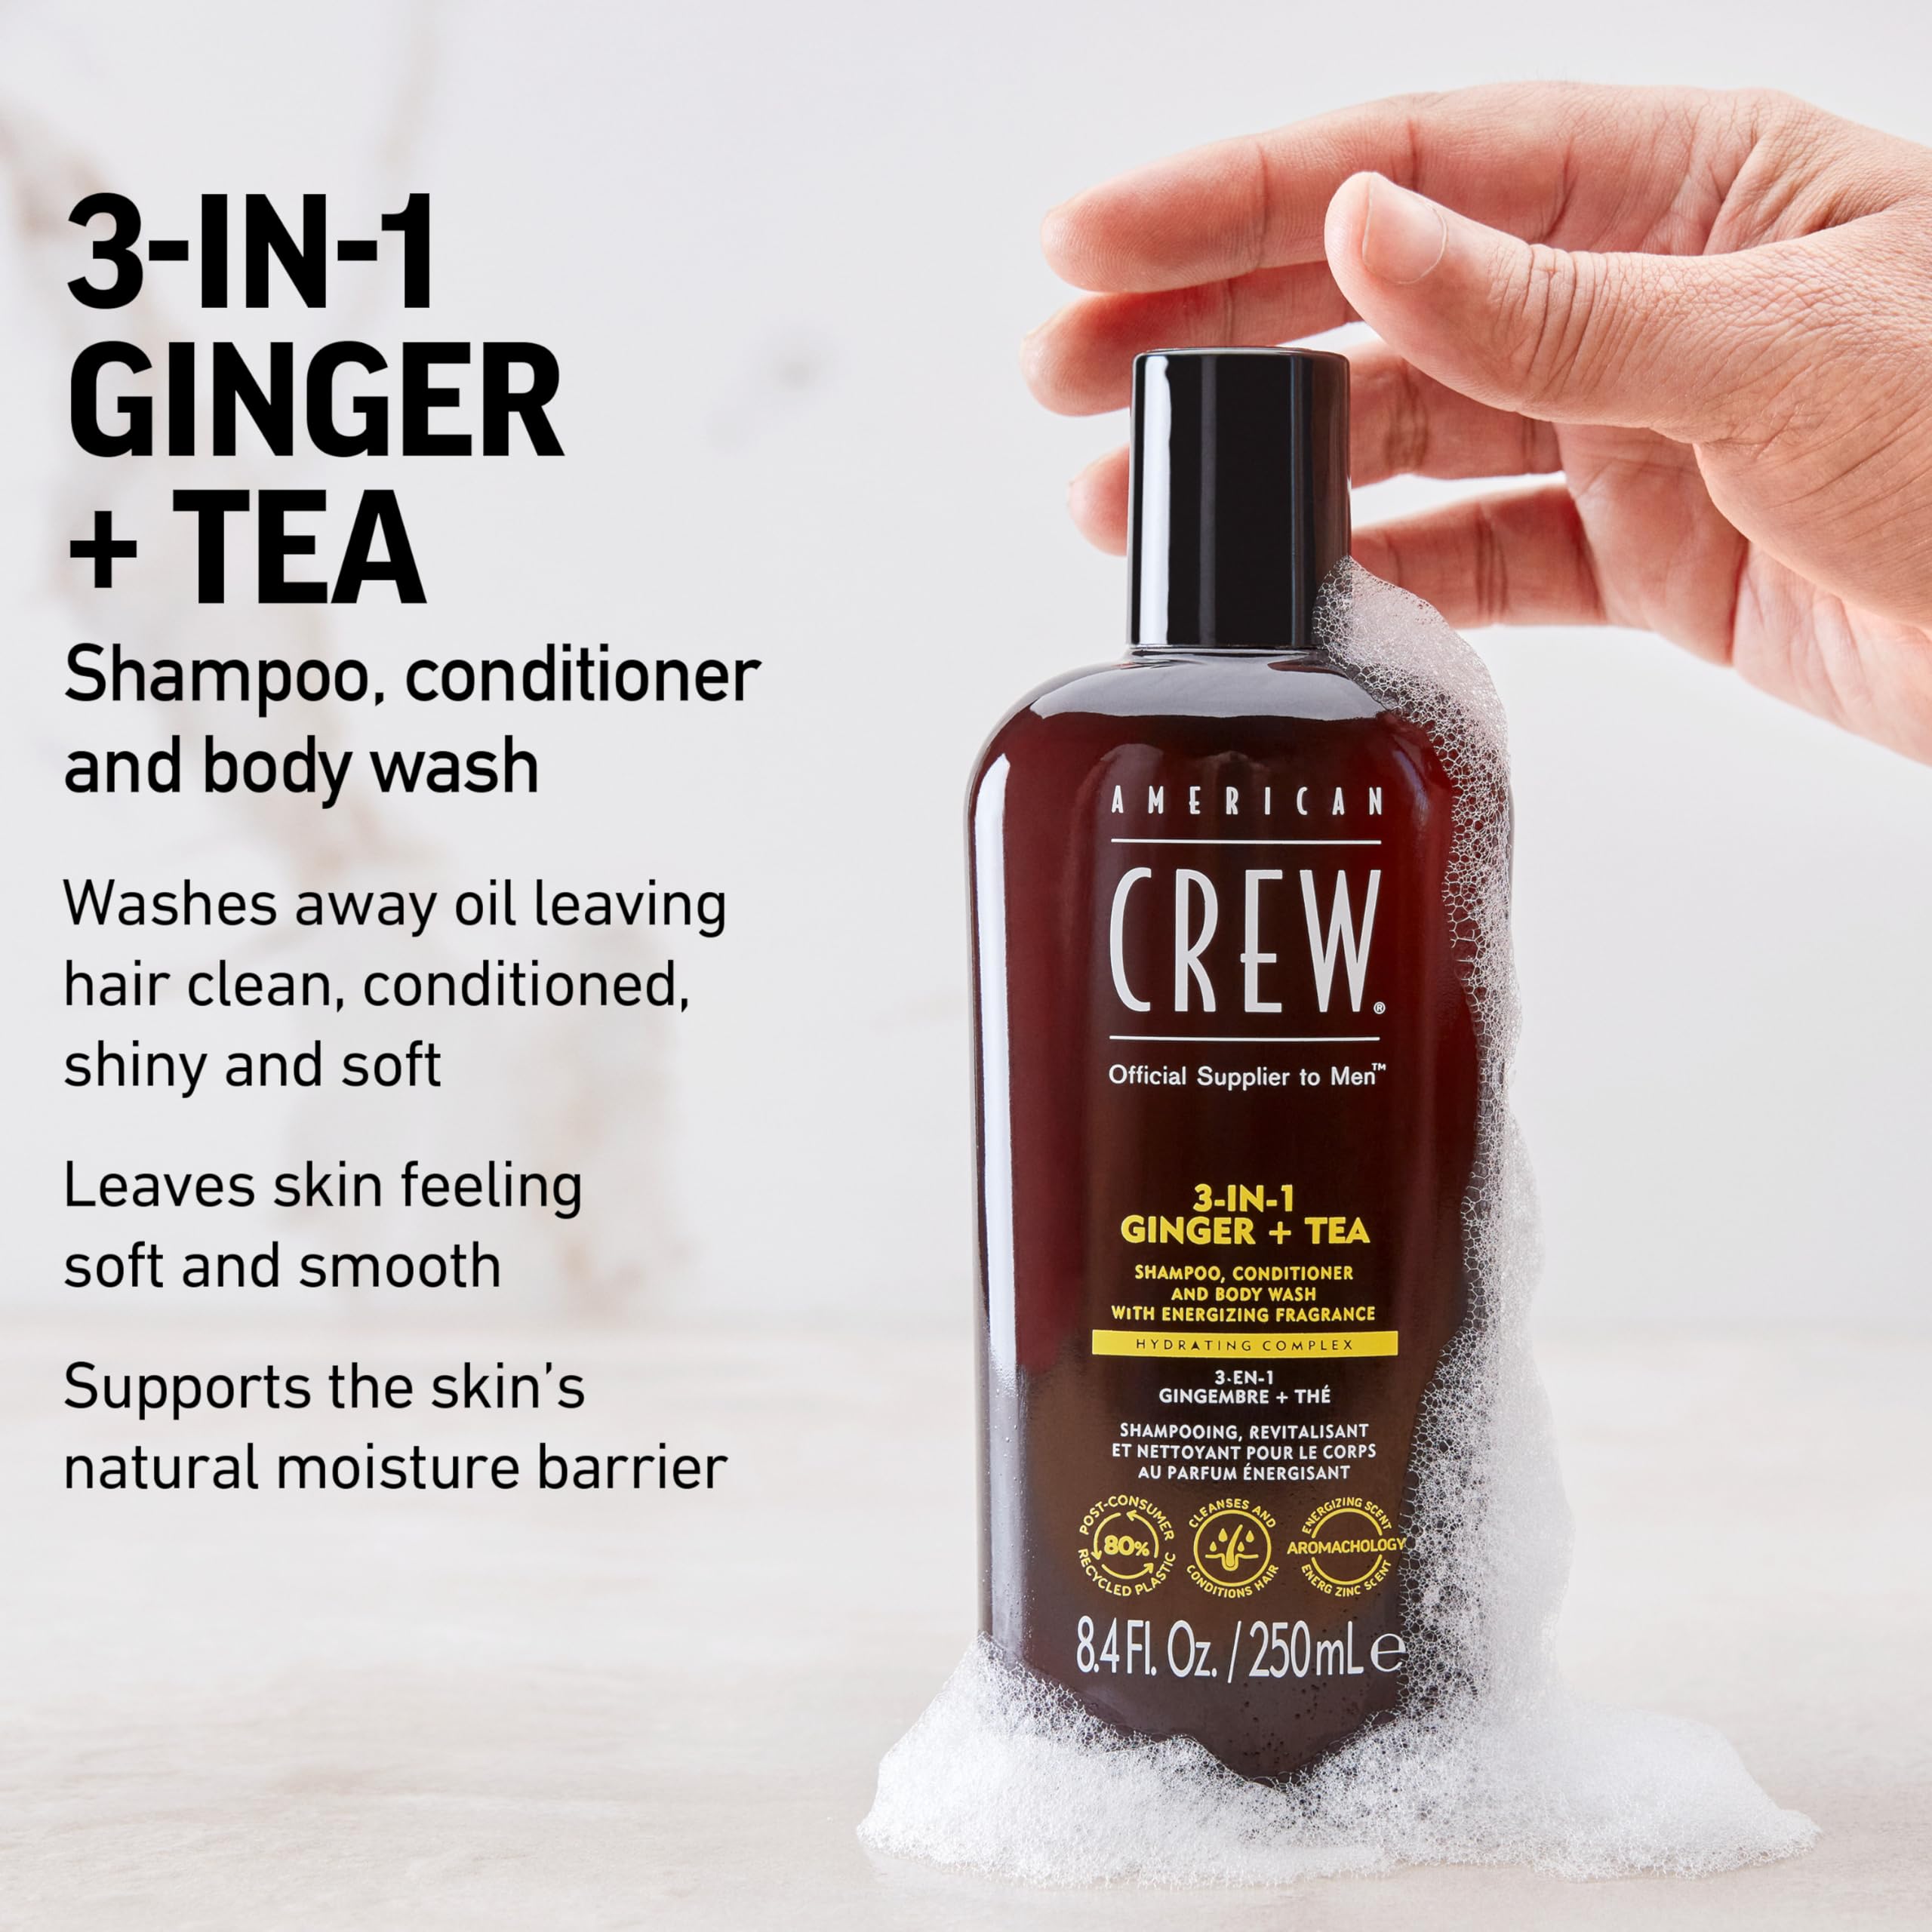 American Crew 3-IN-1 GINGER + TEA Shampoo, Conditioner and Body Wash, 33.8 Fl Oz (Pack of 1)